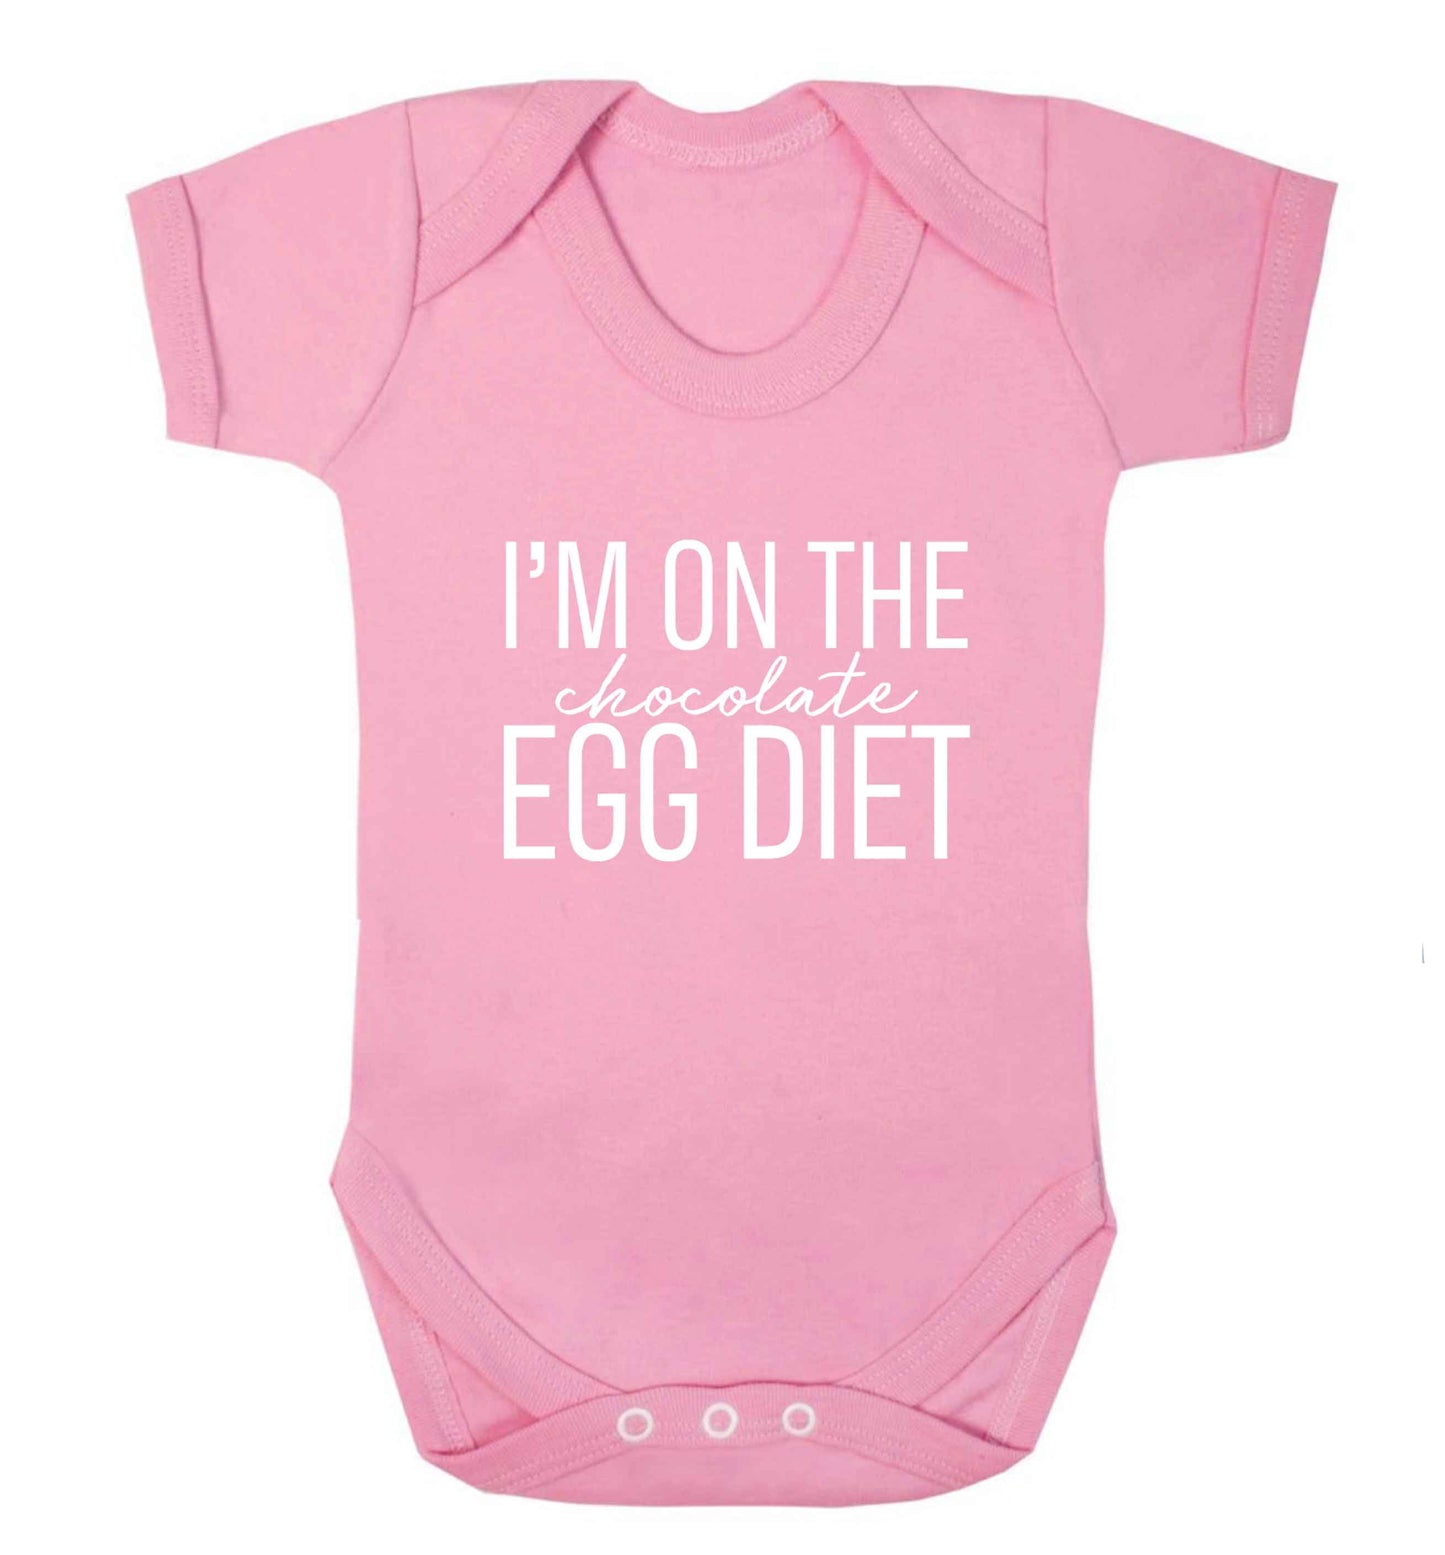 I'm on the chocolate egg diet baby vest pale pink 18-24 months